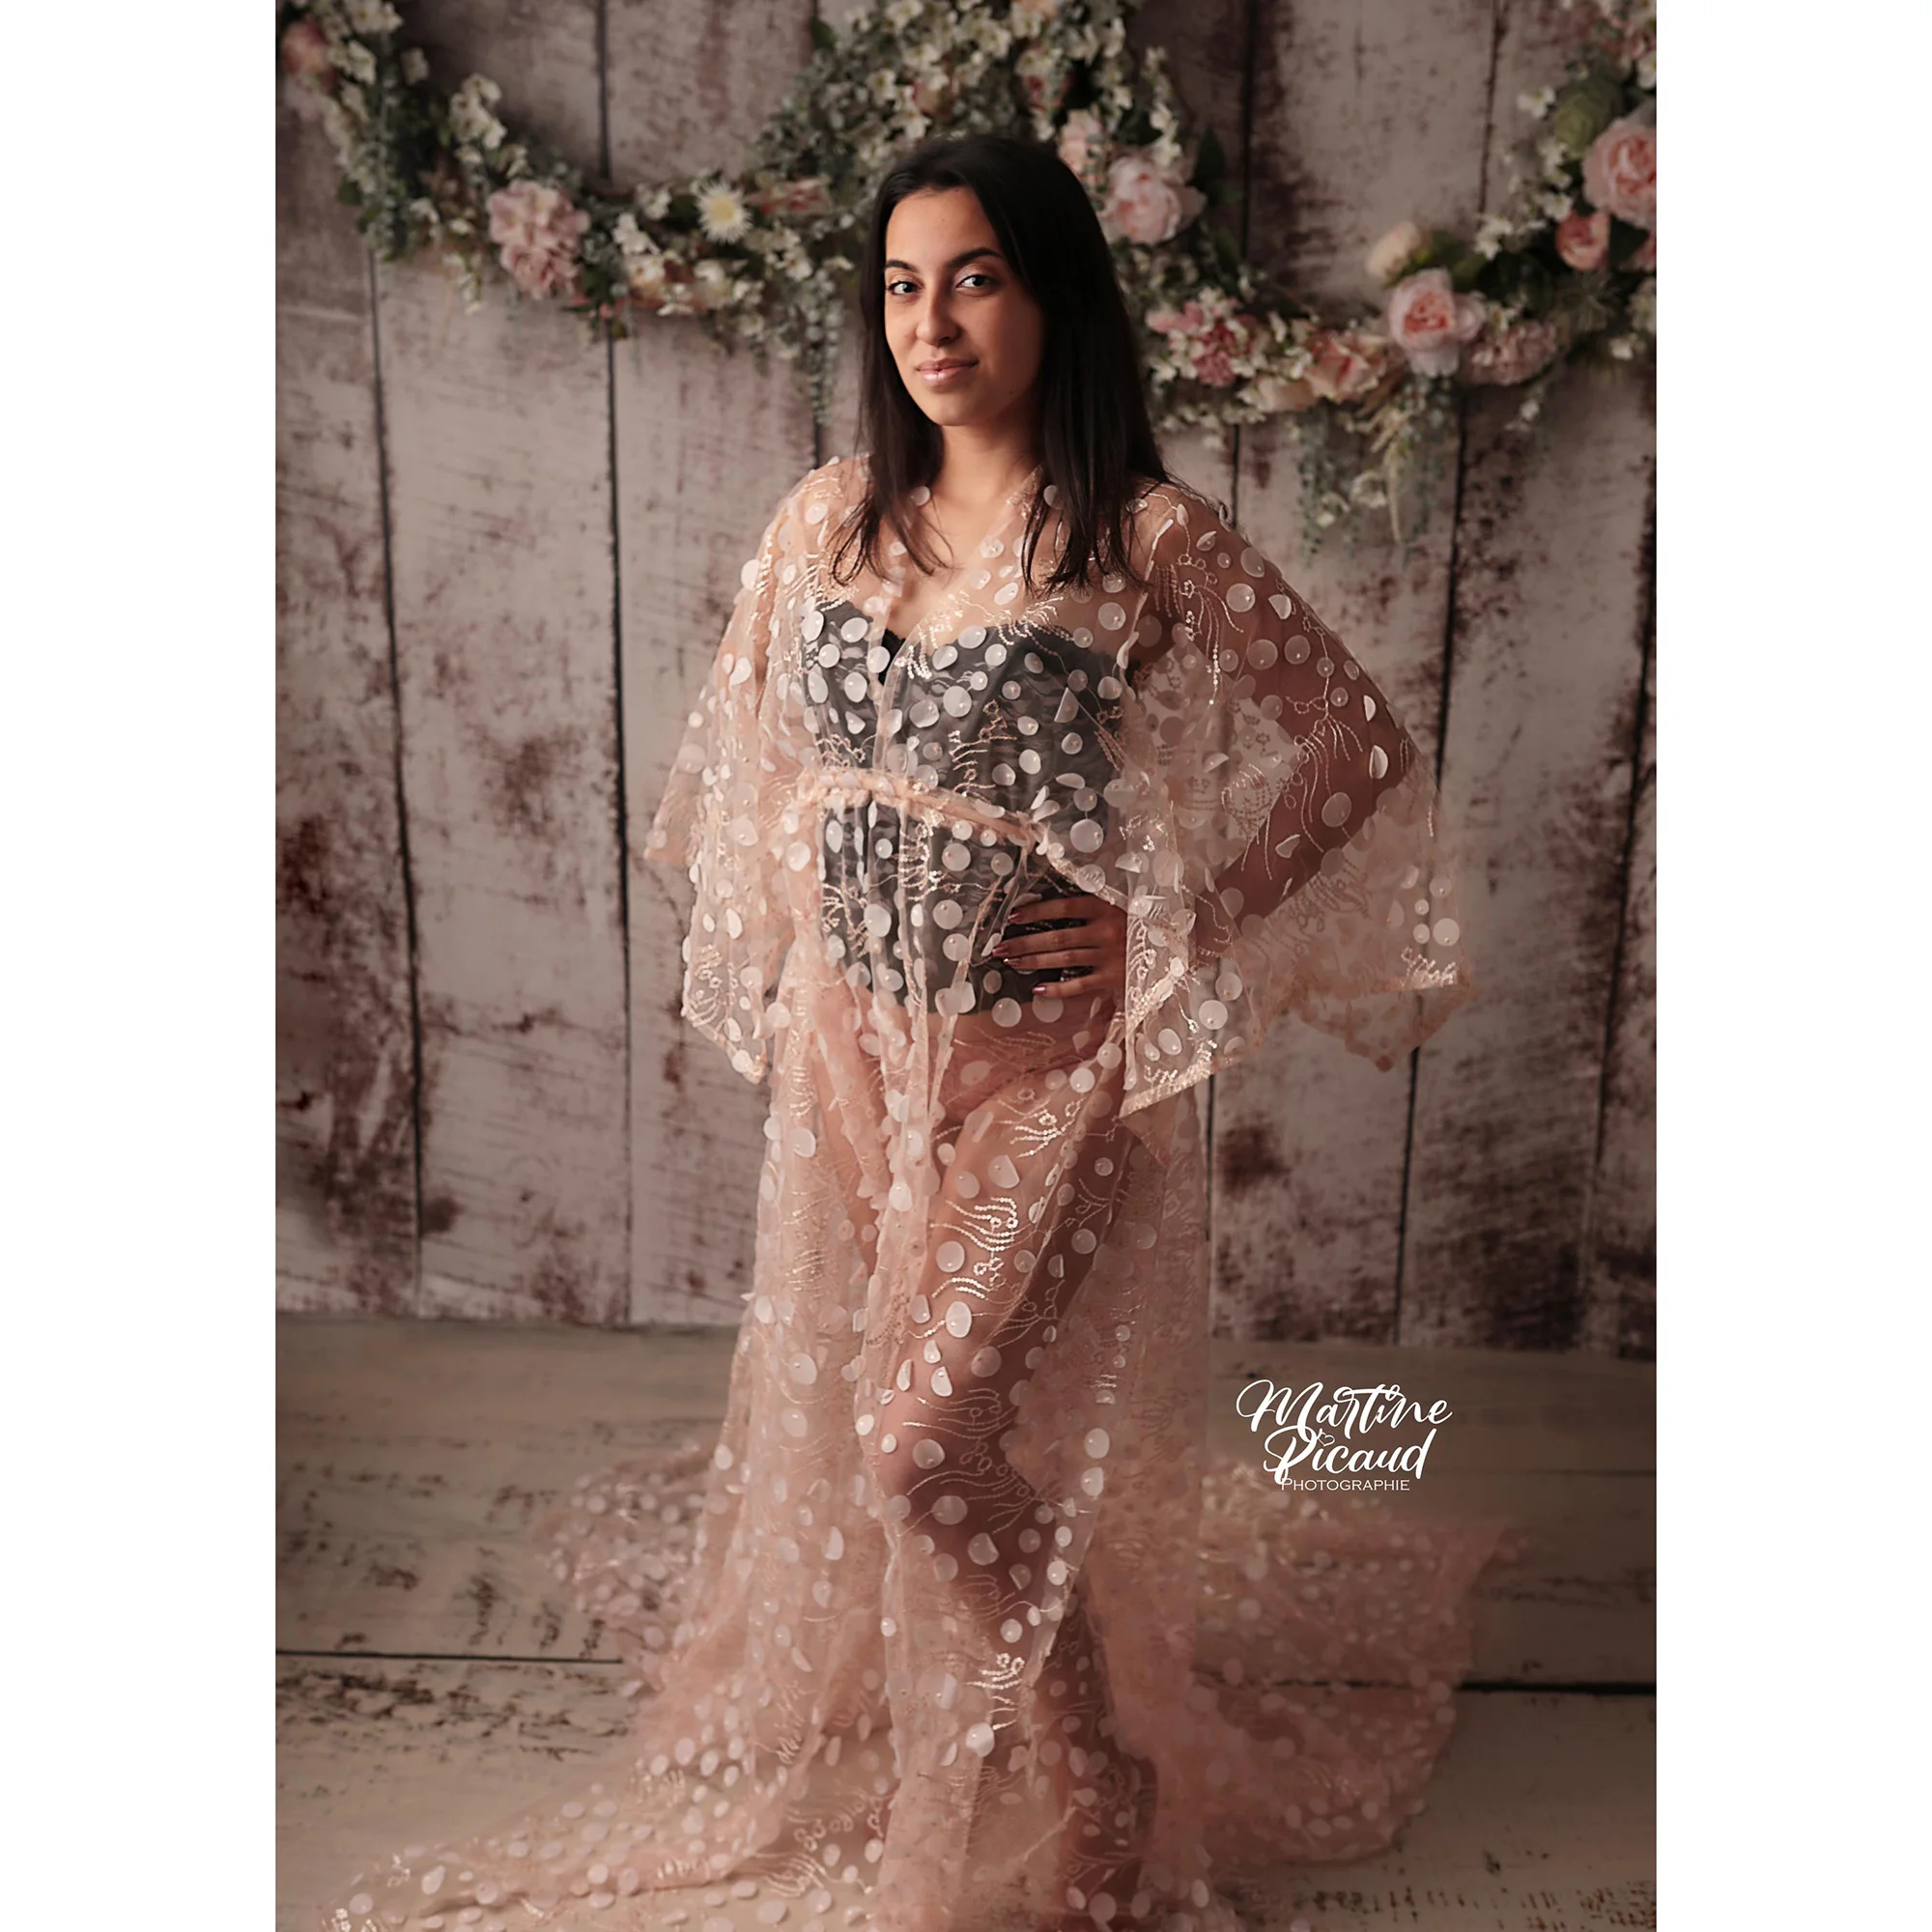 Boho Tulle Photography Spotty Dress Maternity Robe Pregnancy Kaftan Photo Shoot Baby Shower Evening Party Prom Women Couture